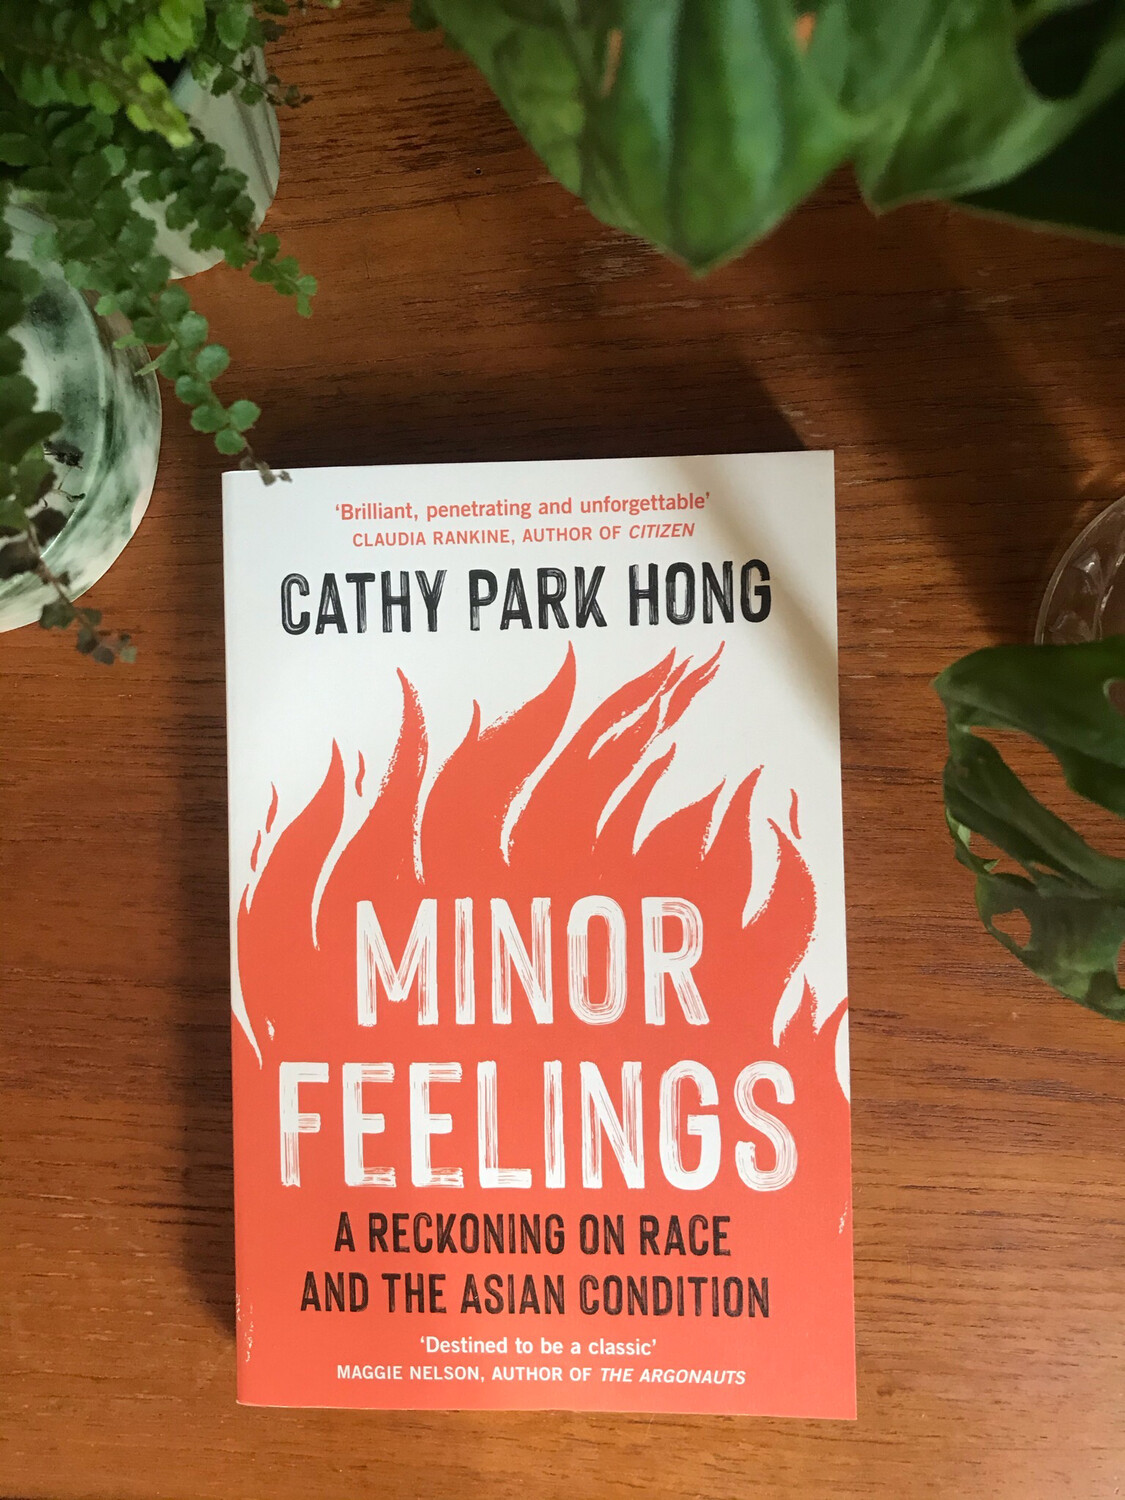 Minor Feelings: A Reckoning On Race And The Asian Condition By Cathy Park Hong